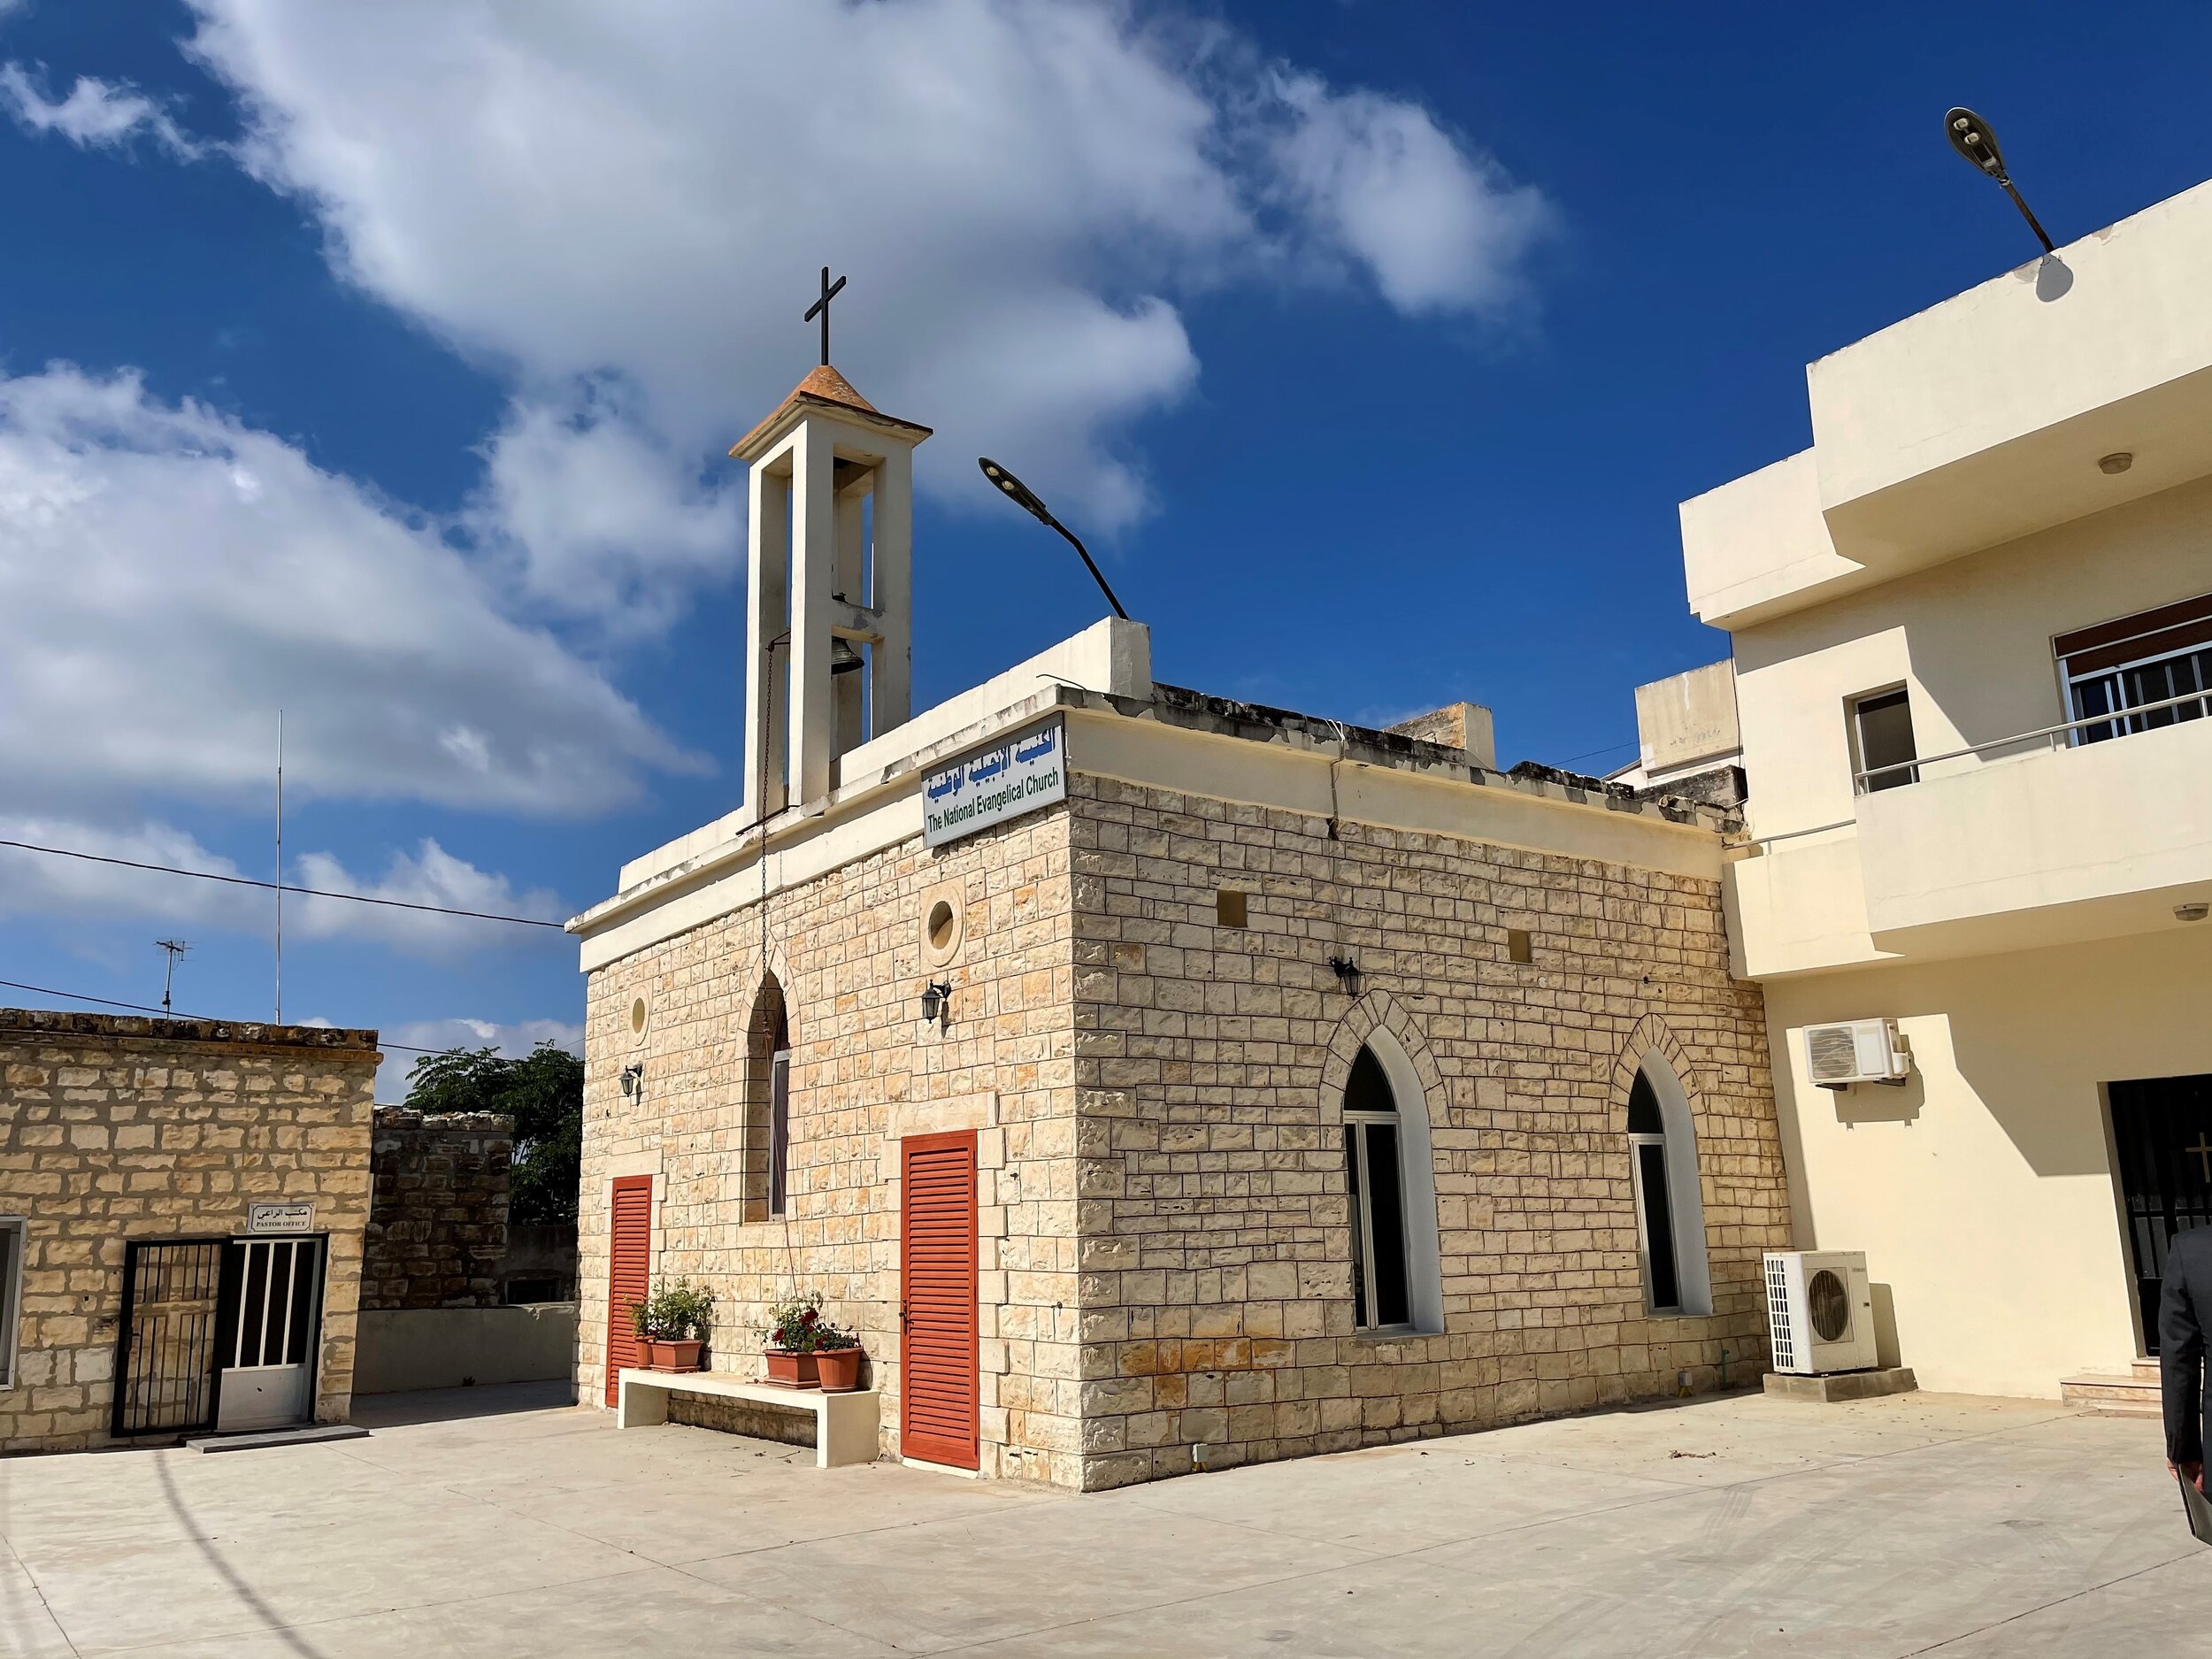  Aalma Ech Chaab: this &nbsp;Presbyterian church, founded by Dr Cornelius Van Dyck, is a stone’s throw from Lebanon’s southern border&nbsp; 